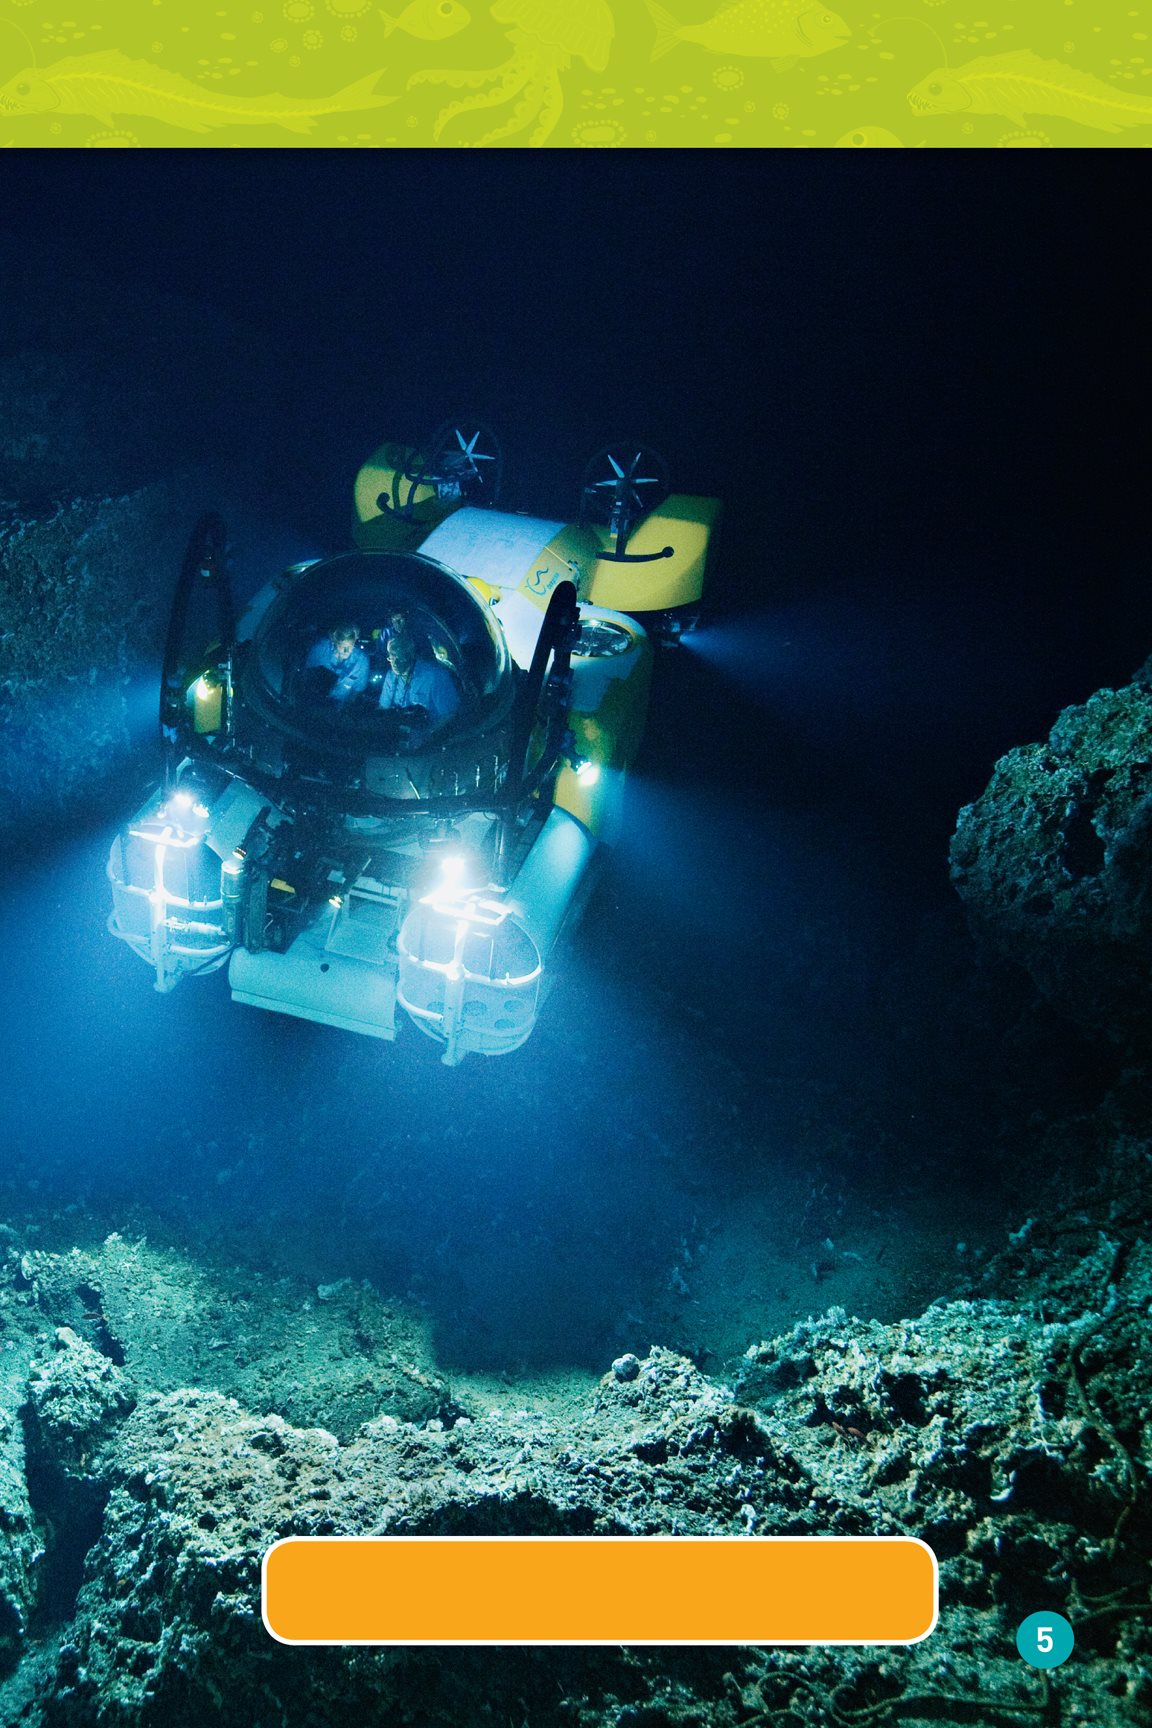 This submersible called DeepSee explores the ocean floor near Cocos Island - photo 7